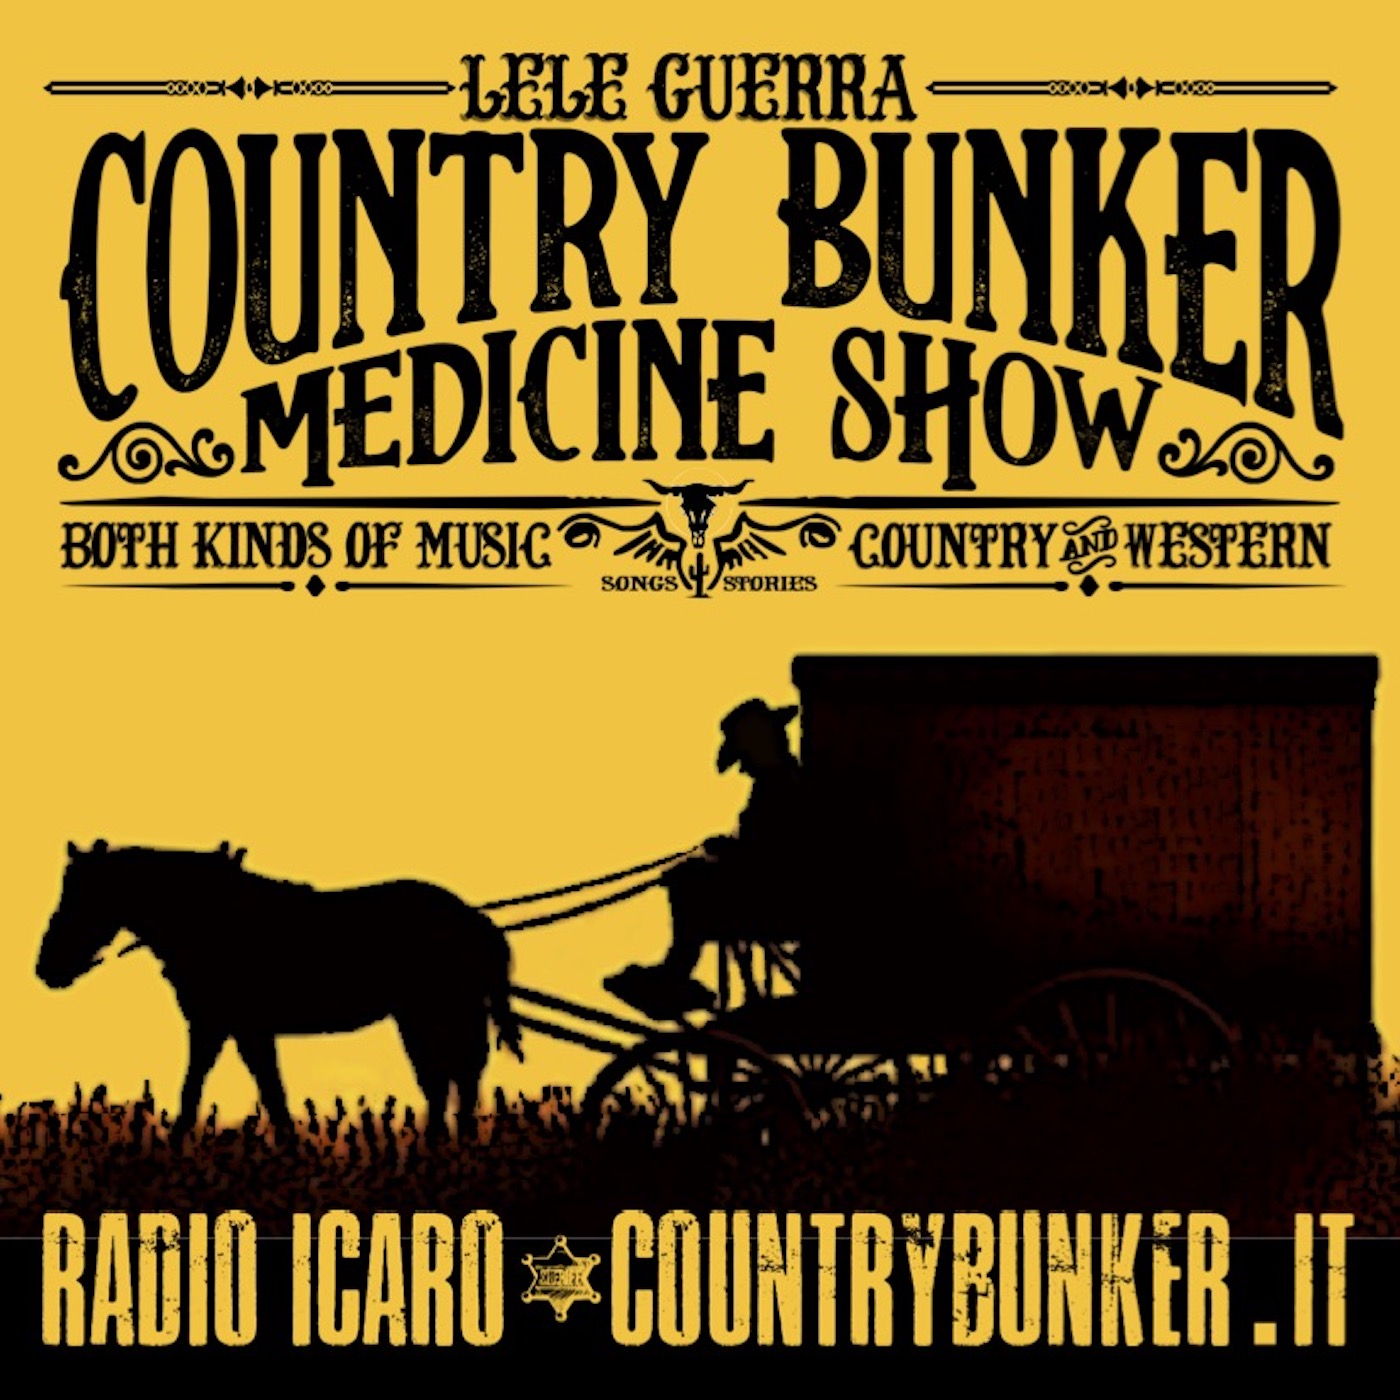 Country Bunker Medicine Show